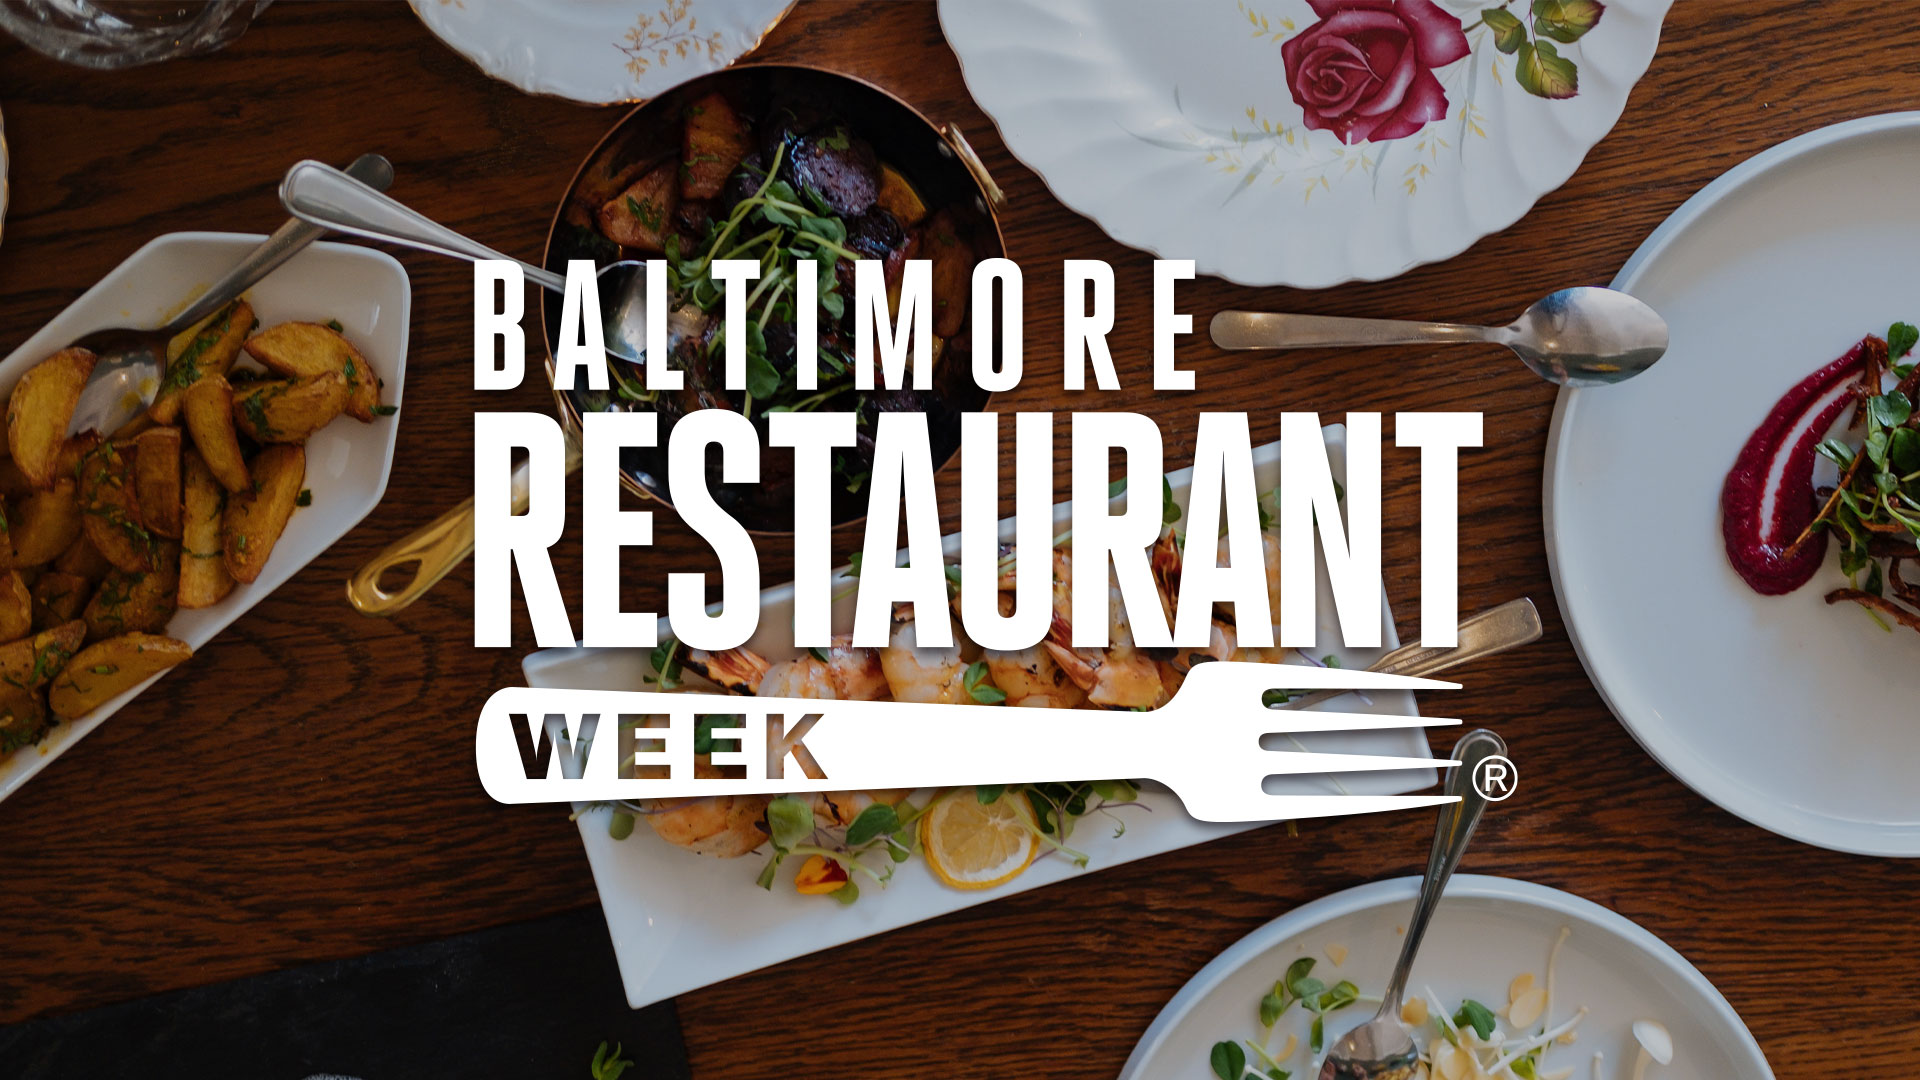 Baltimore Restaurant Week logo overlay on table of colorful food.